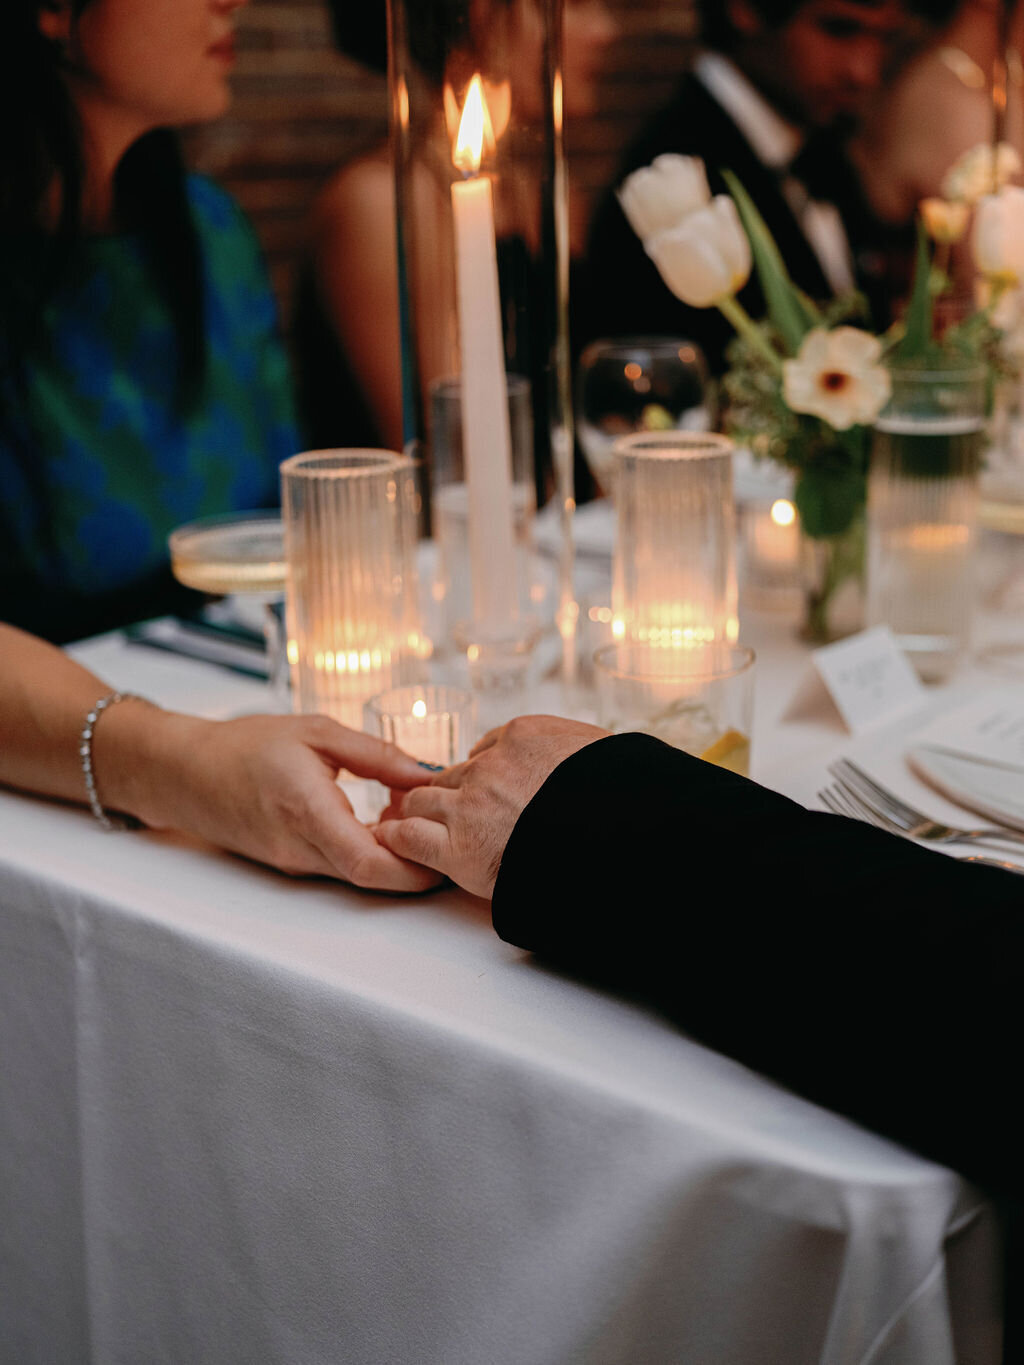 Holding hands at the table with candles and florals in the background.